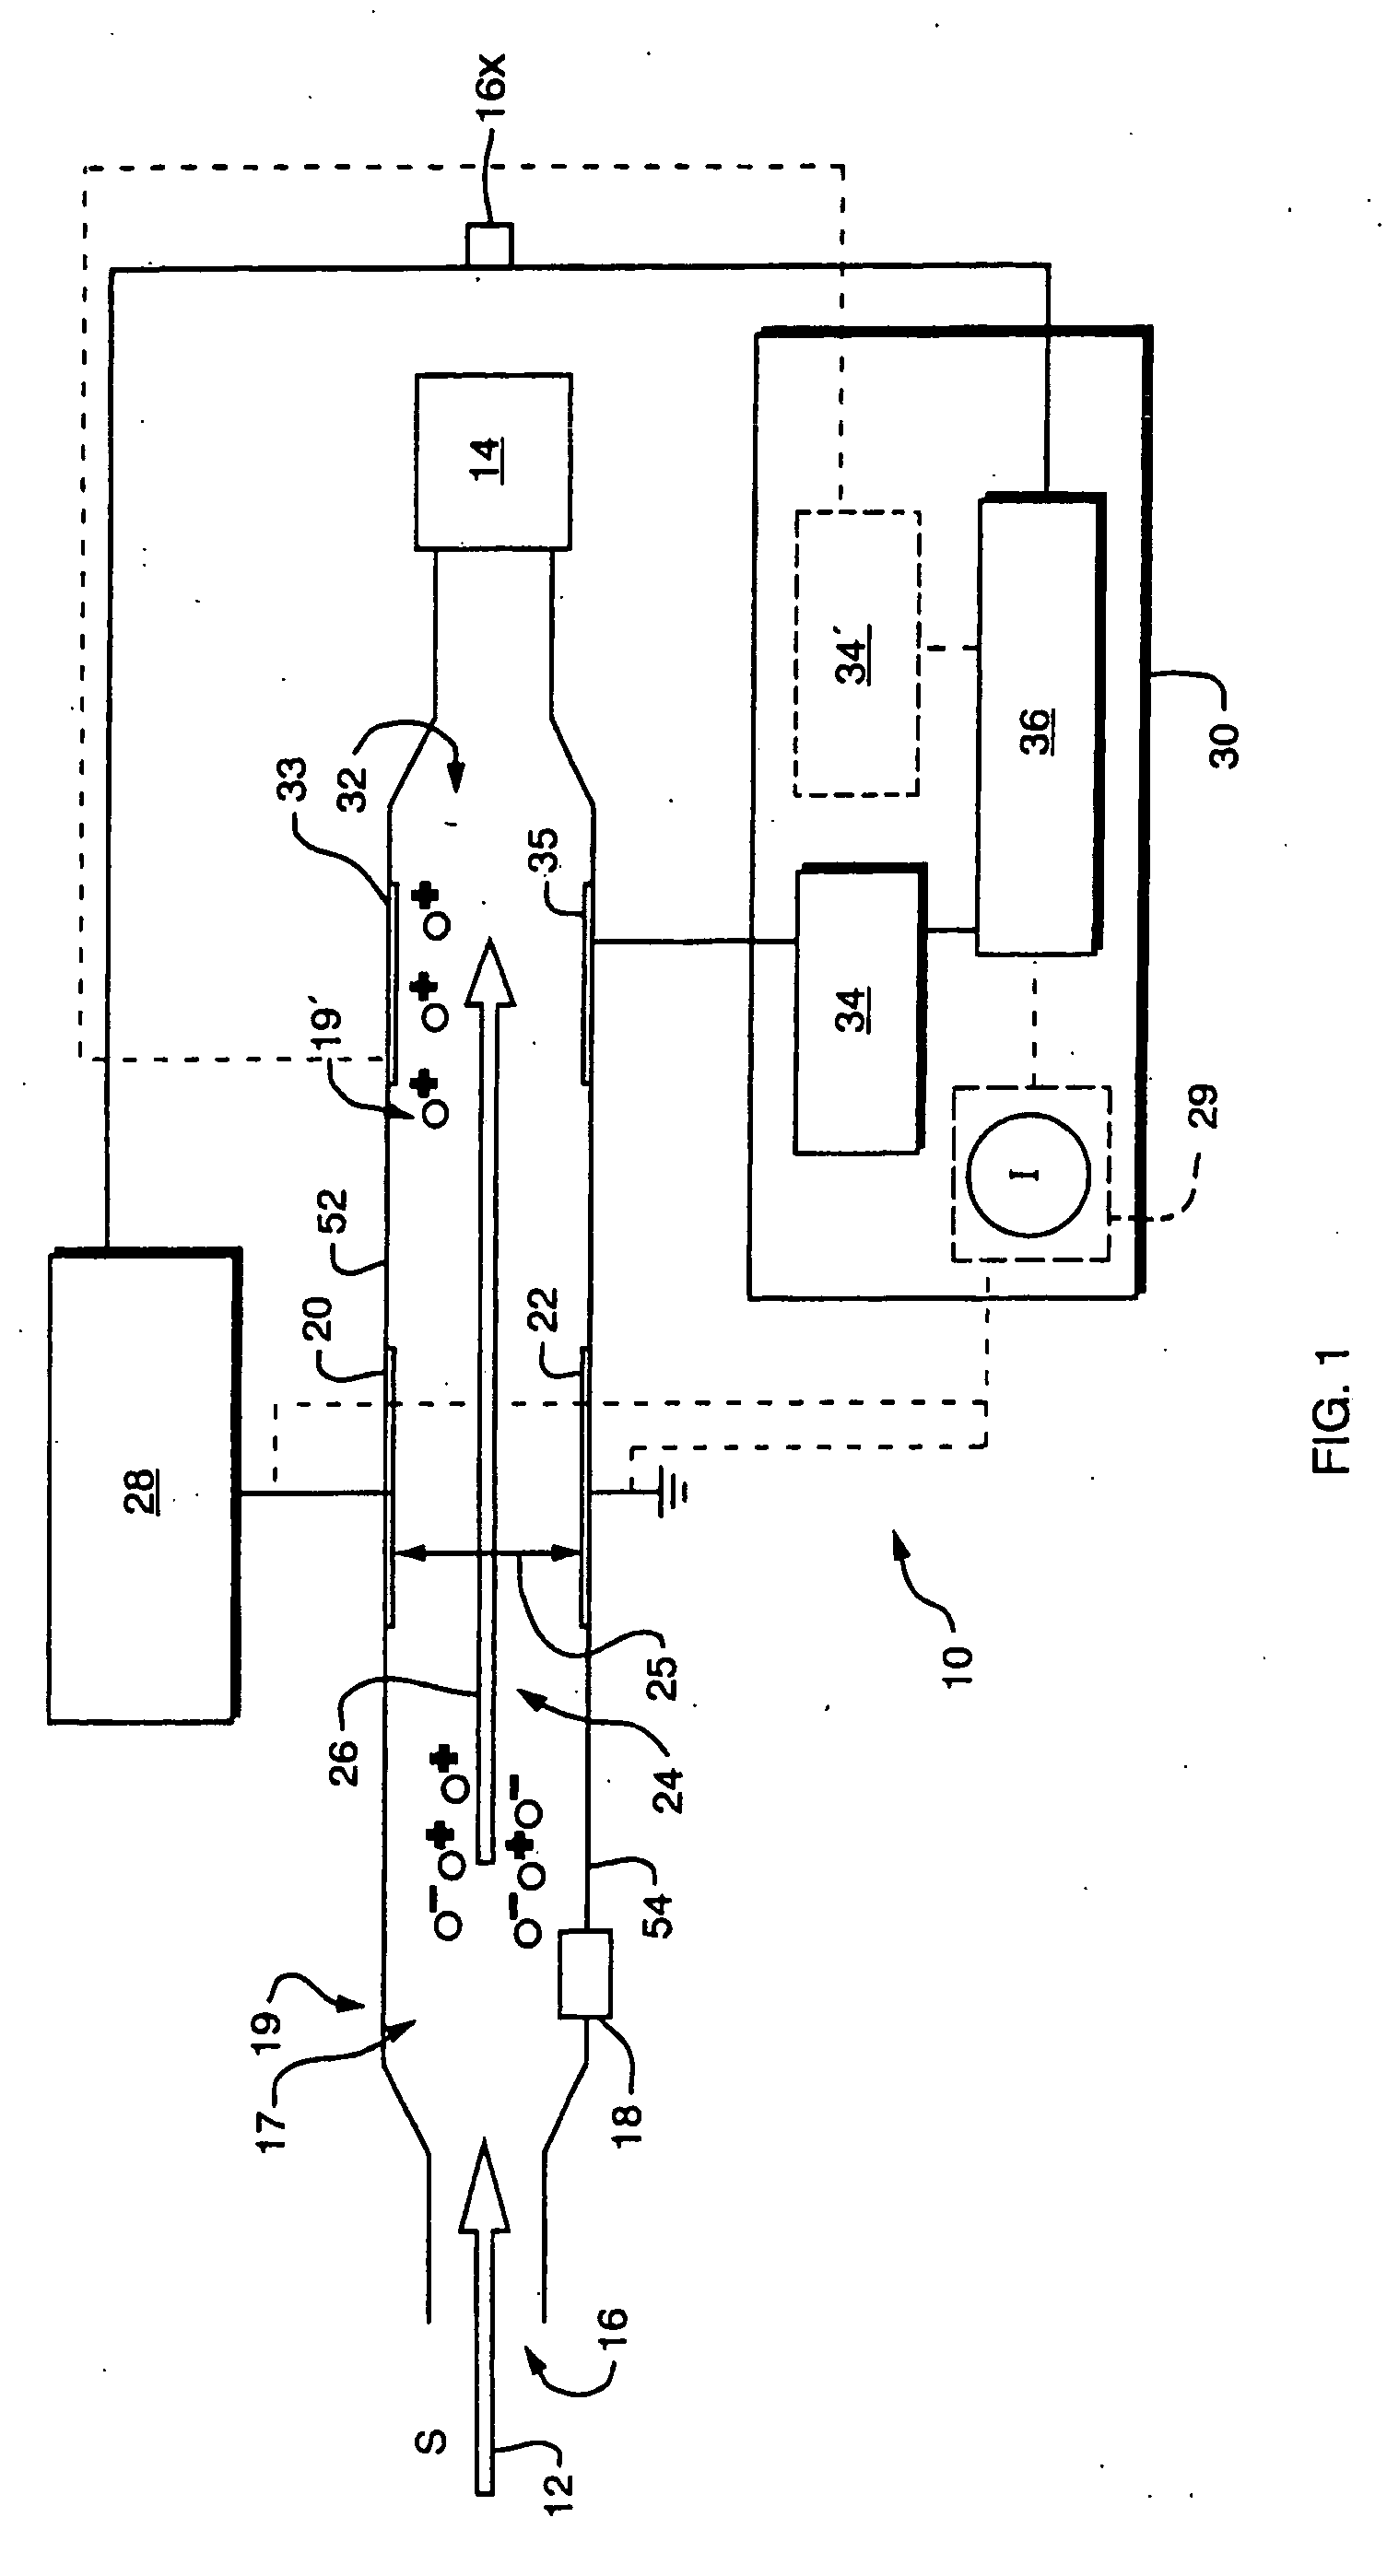 Longitudinal field driven ion mobility filter and detection system